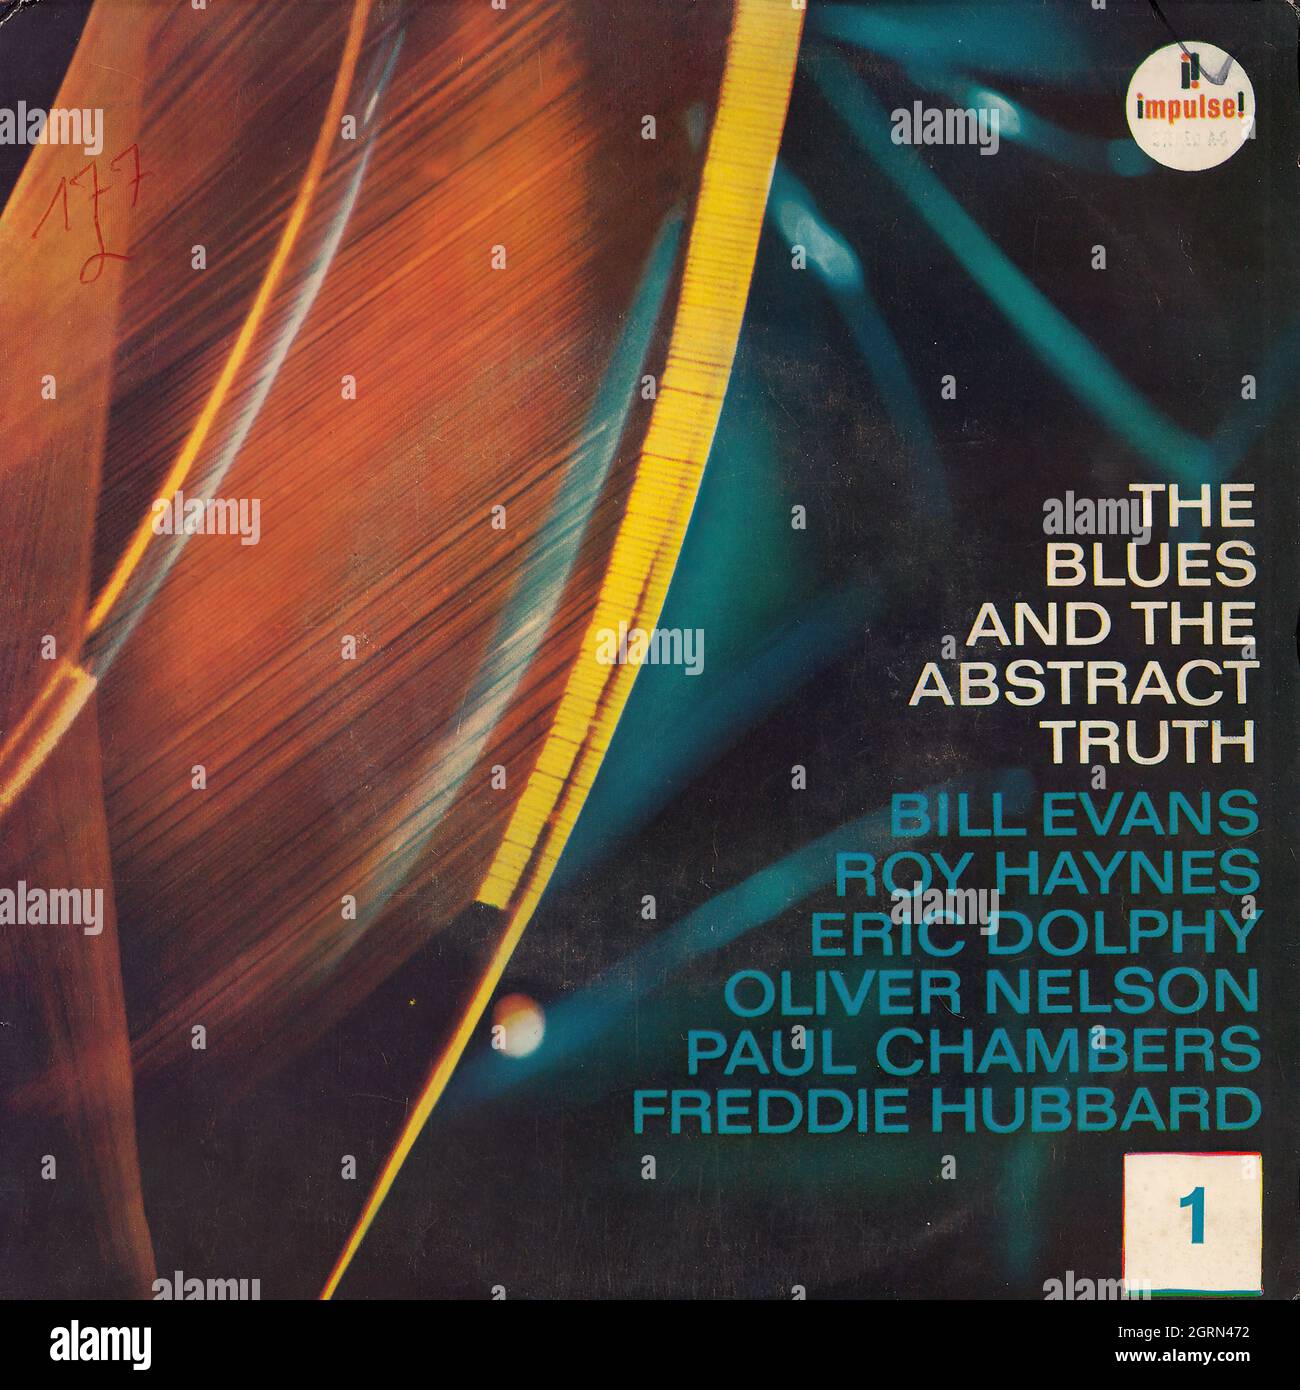 B. Evans, R. Haynes, E. Dolphy, O. Nelson, P. Chambers & F. Hubbard - The Blues and the Abstract Truth EP Nr. 1 - Vintage Vinyl Record Cover Stockfoto